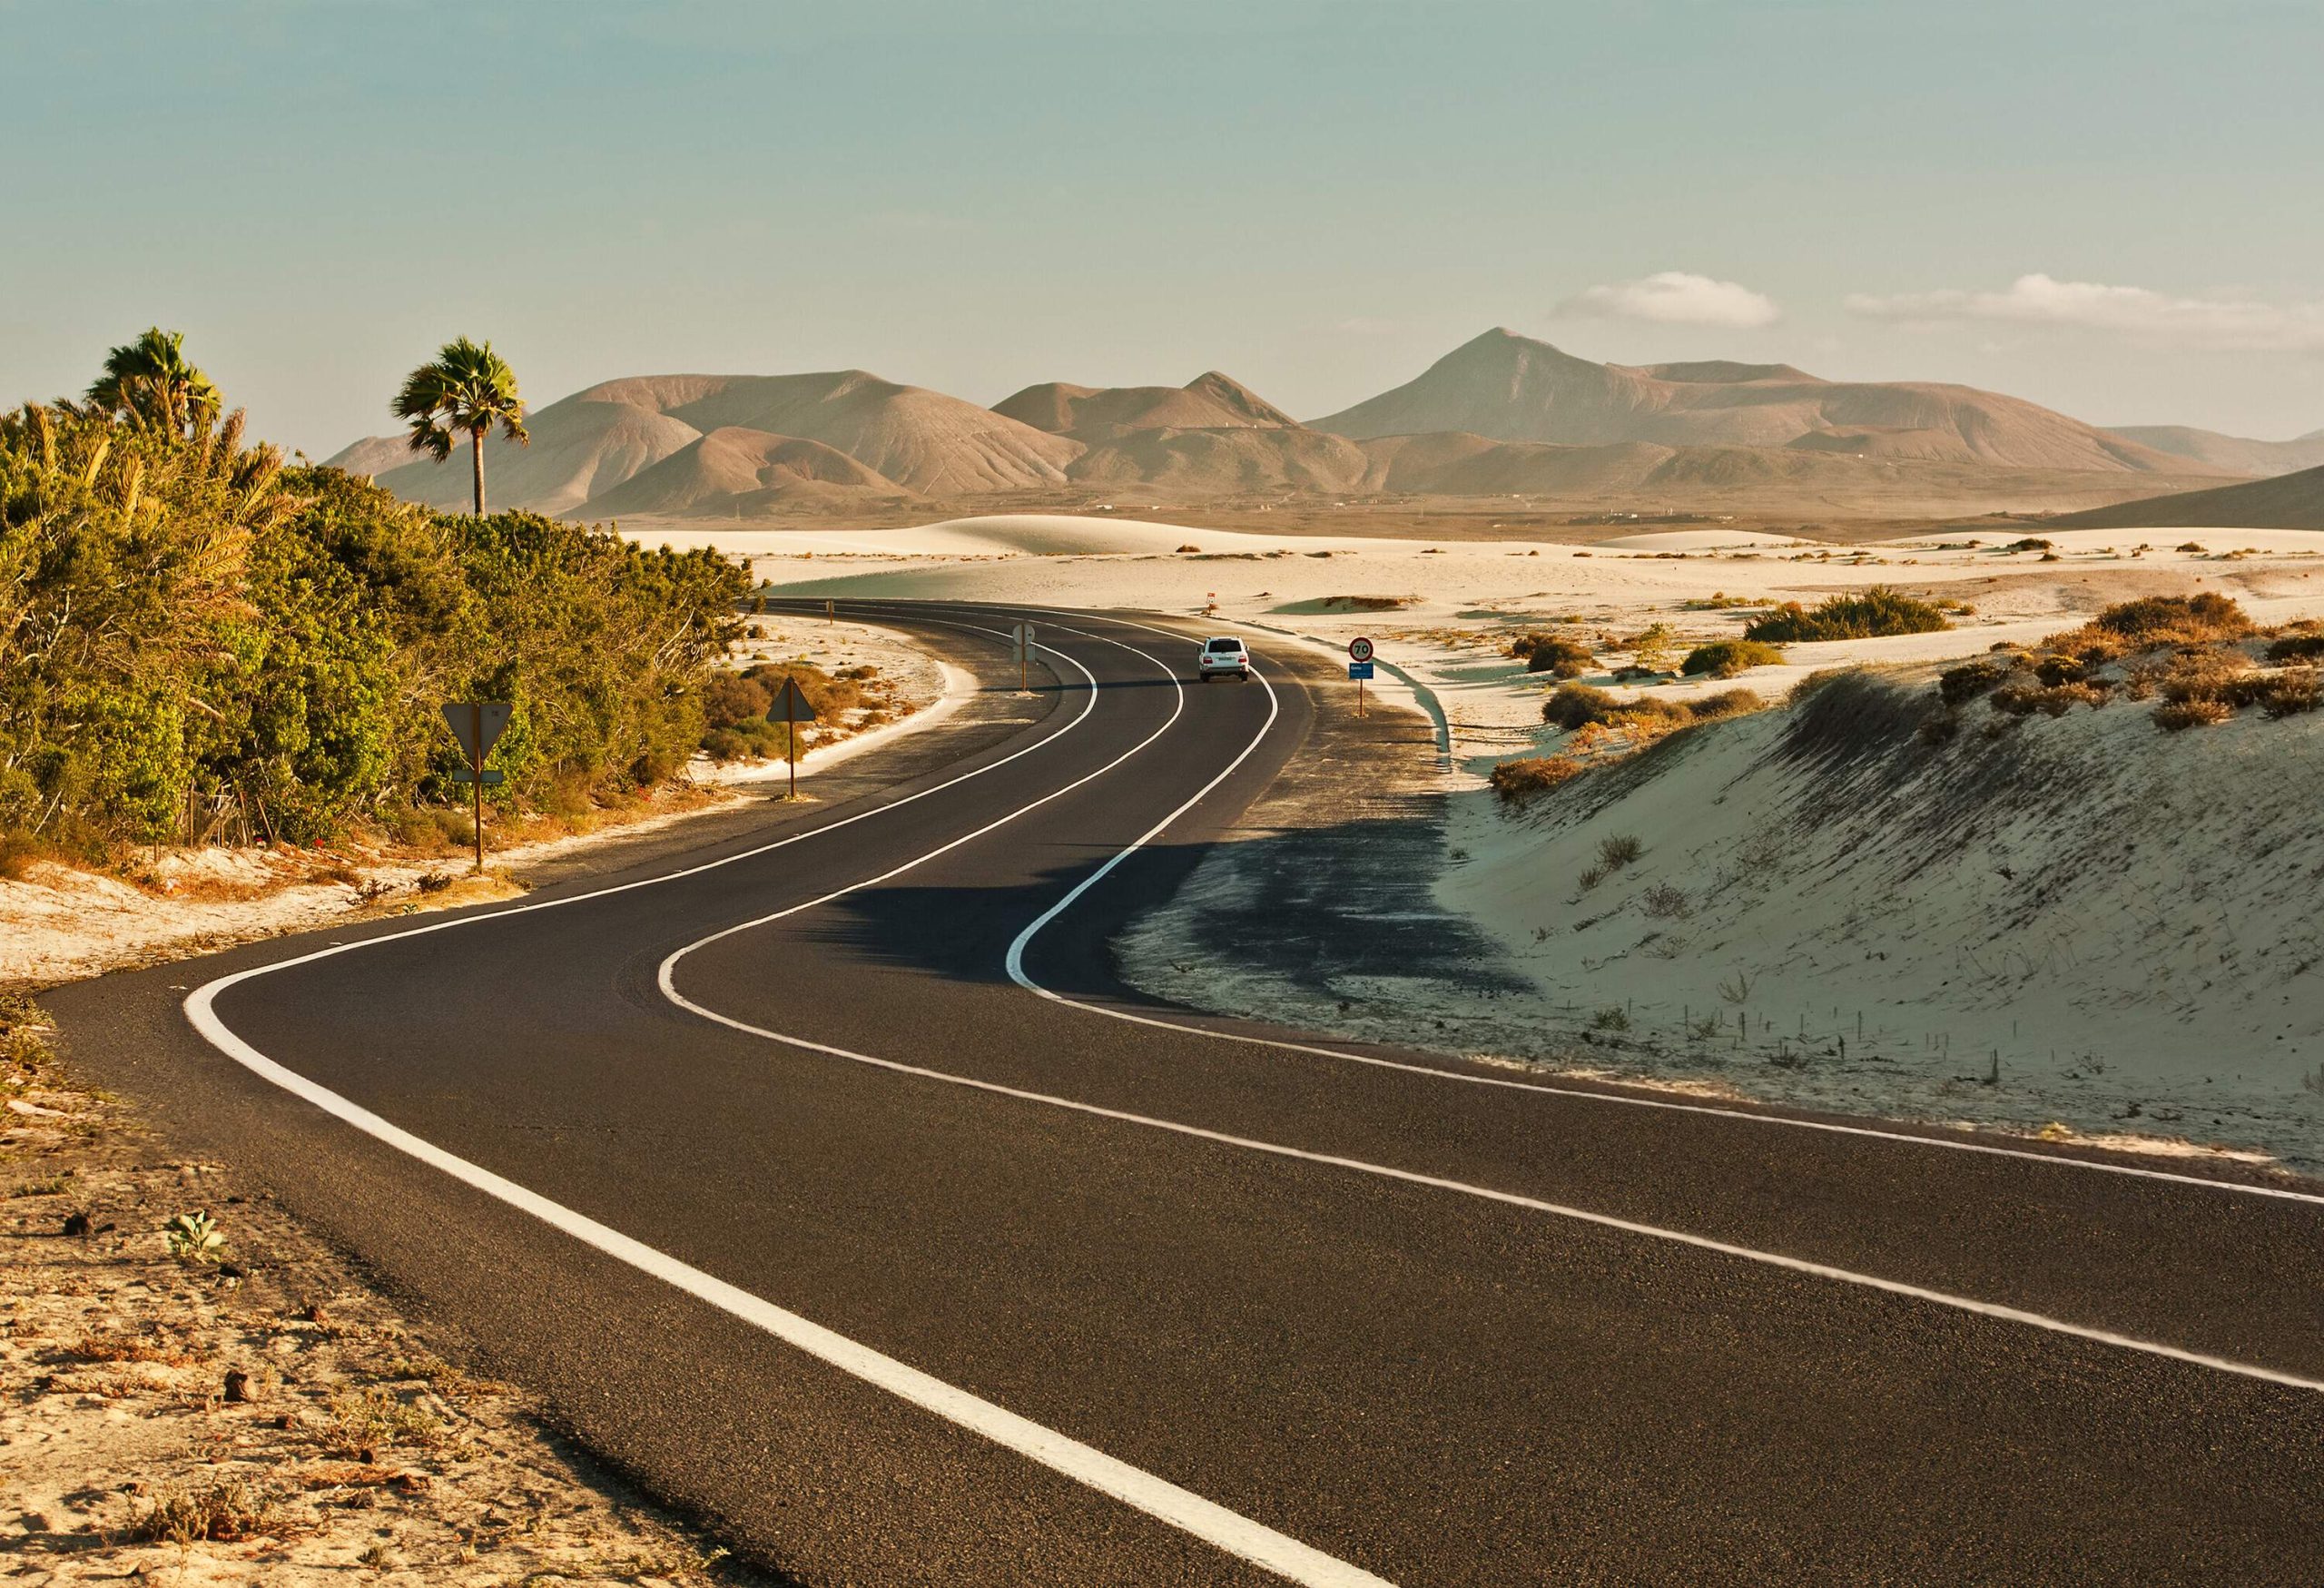 A car travels down a winding road surrounded by grassy sand dunes with distant mountain views.